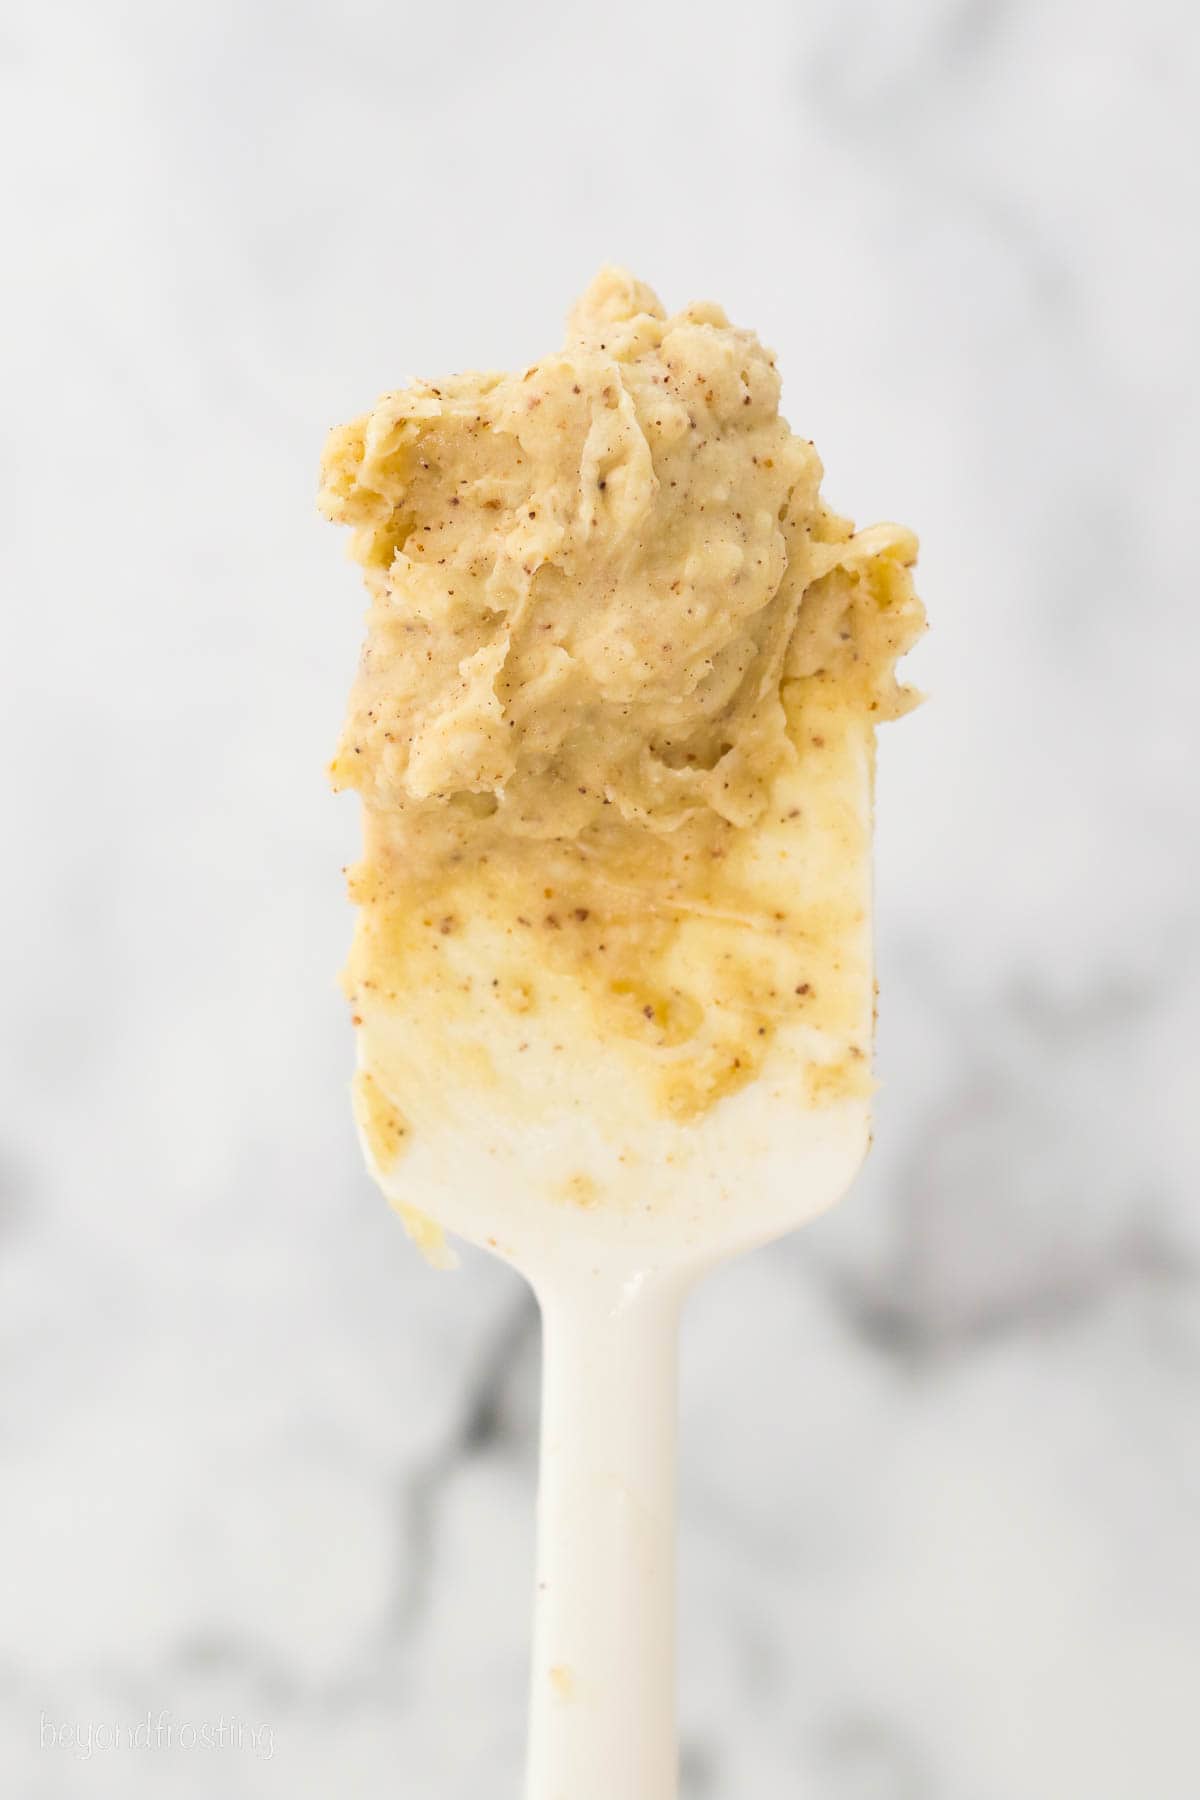 Brown butter on the end of a white rubber spatula.